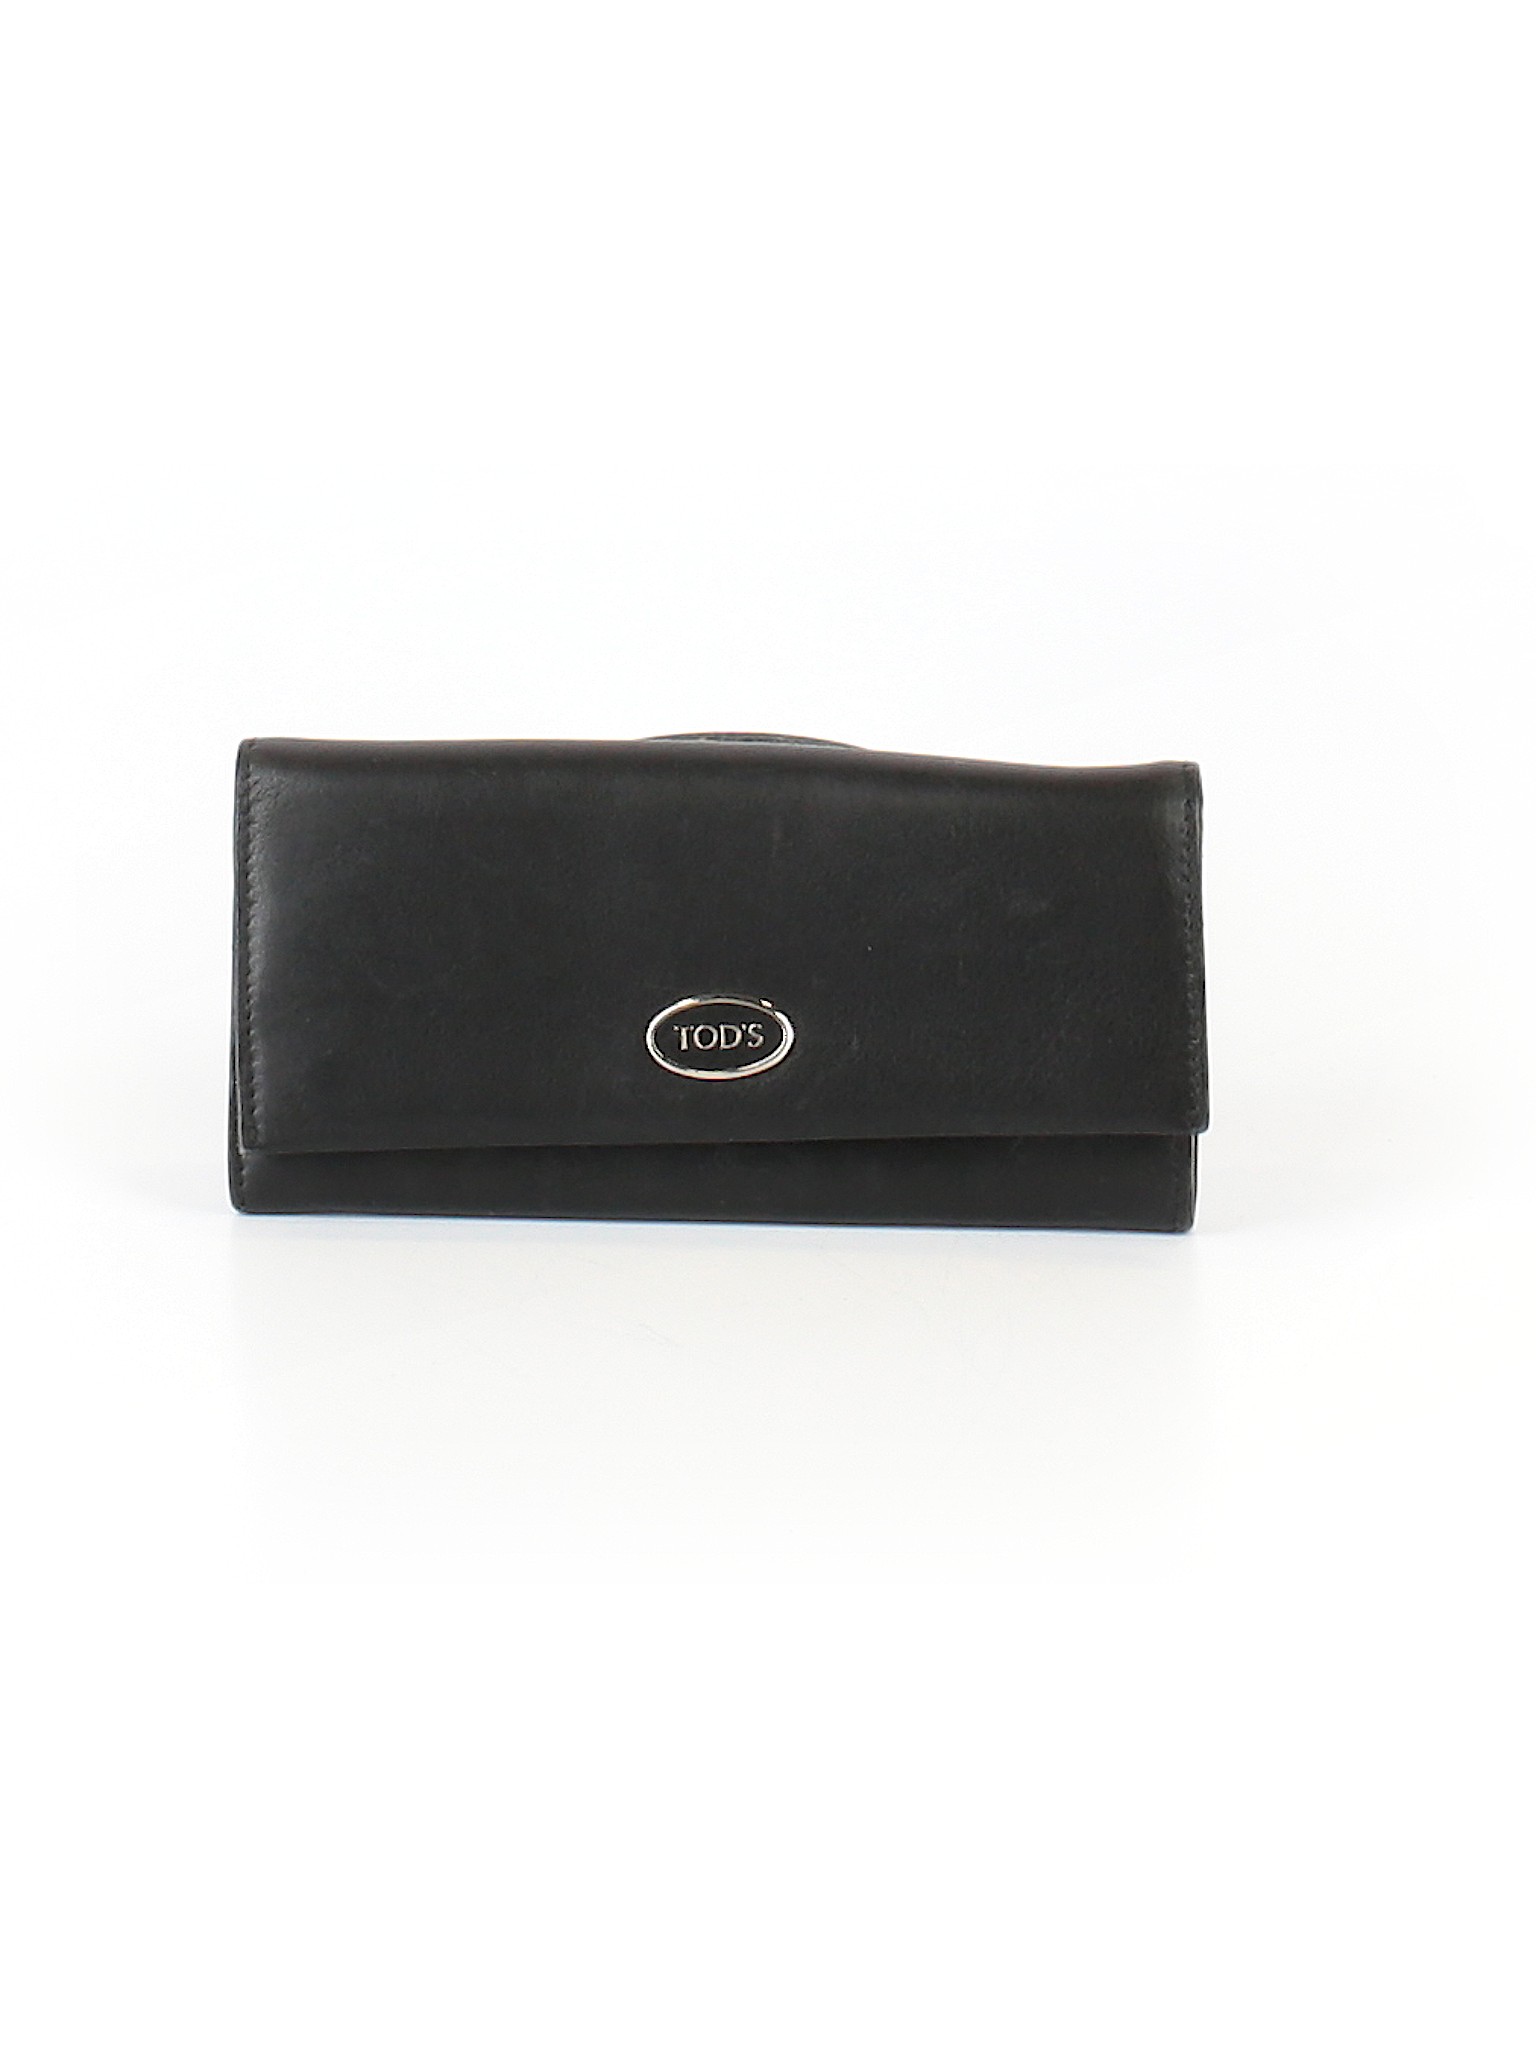 Tod's Solid Black Leather Wallet One Size - 82% off | thredUP